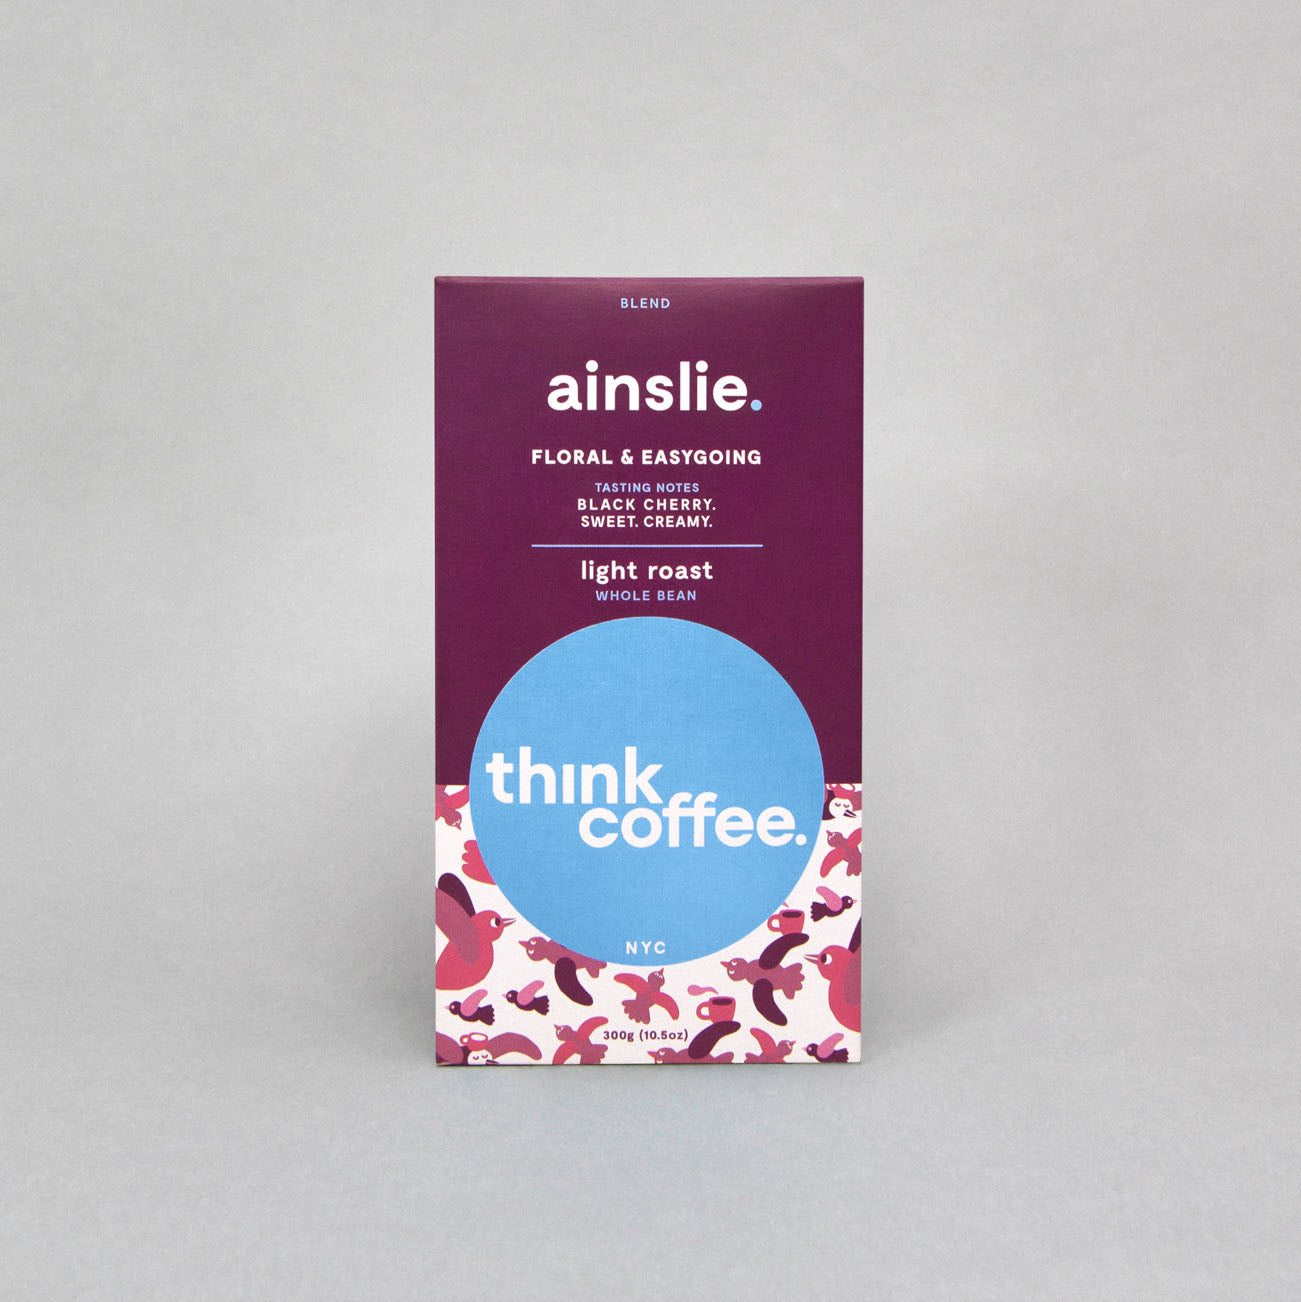 Ainslie Blend Every Other Week Subscription 6 months